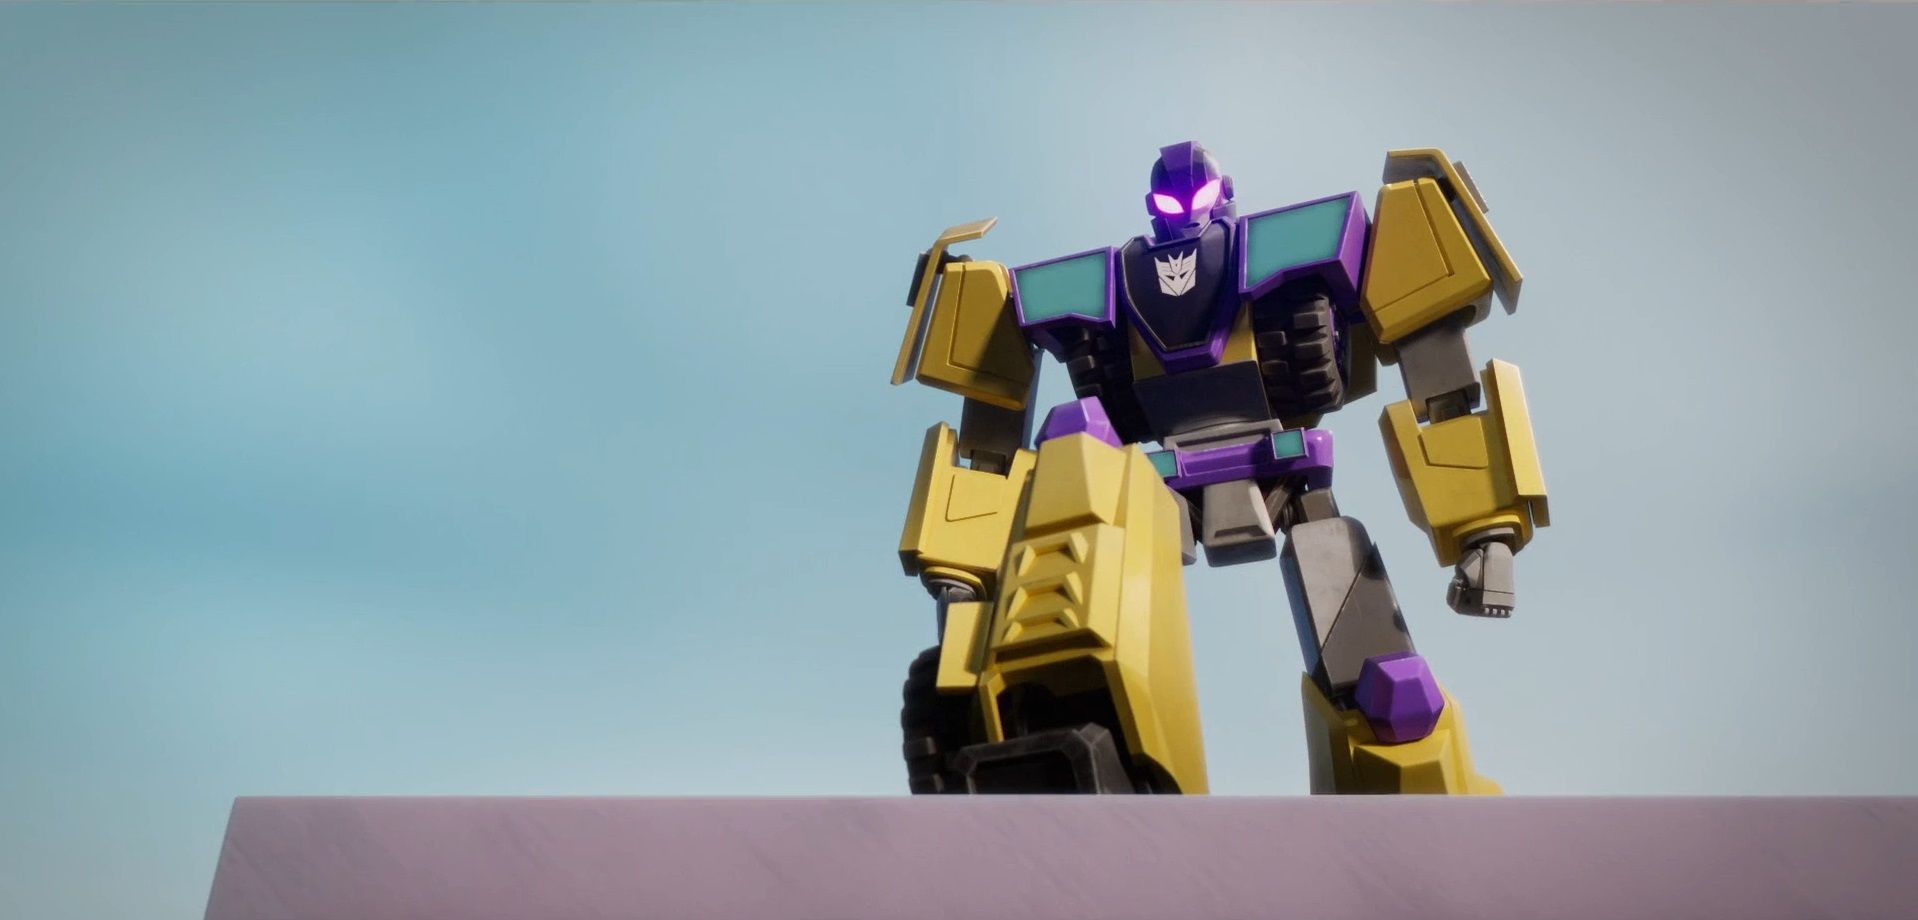 Where Can You Watch Transformers: EarthSpark?